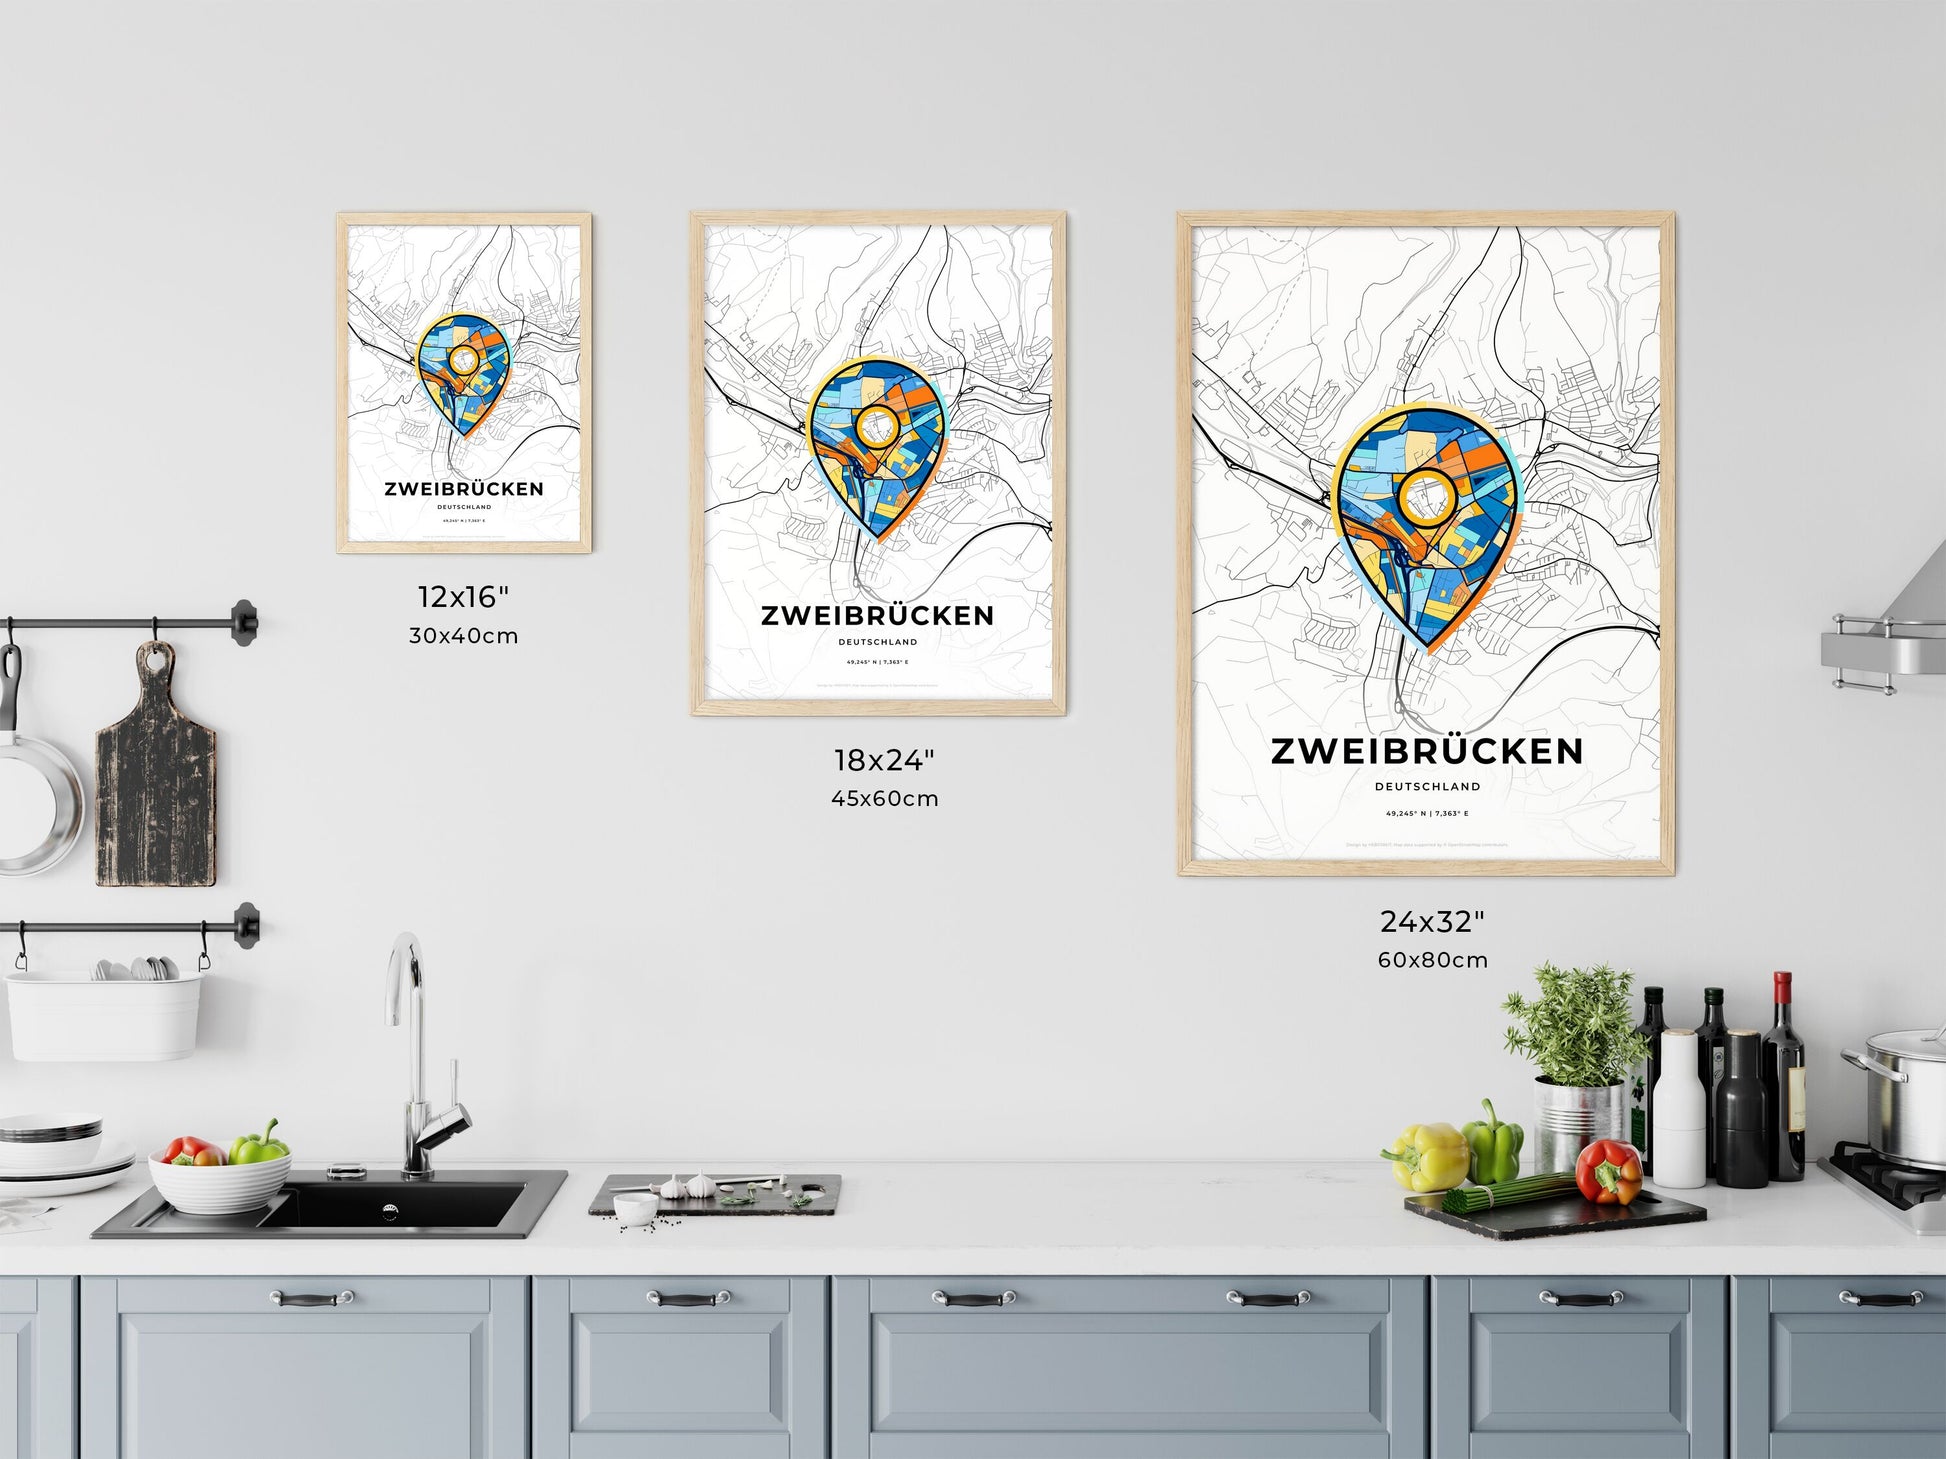 ZWEIBRUCKEN GERMANY minimal art map with a colorful icon. Where it all began, Couple map gift.